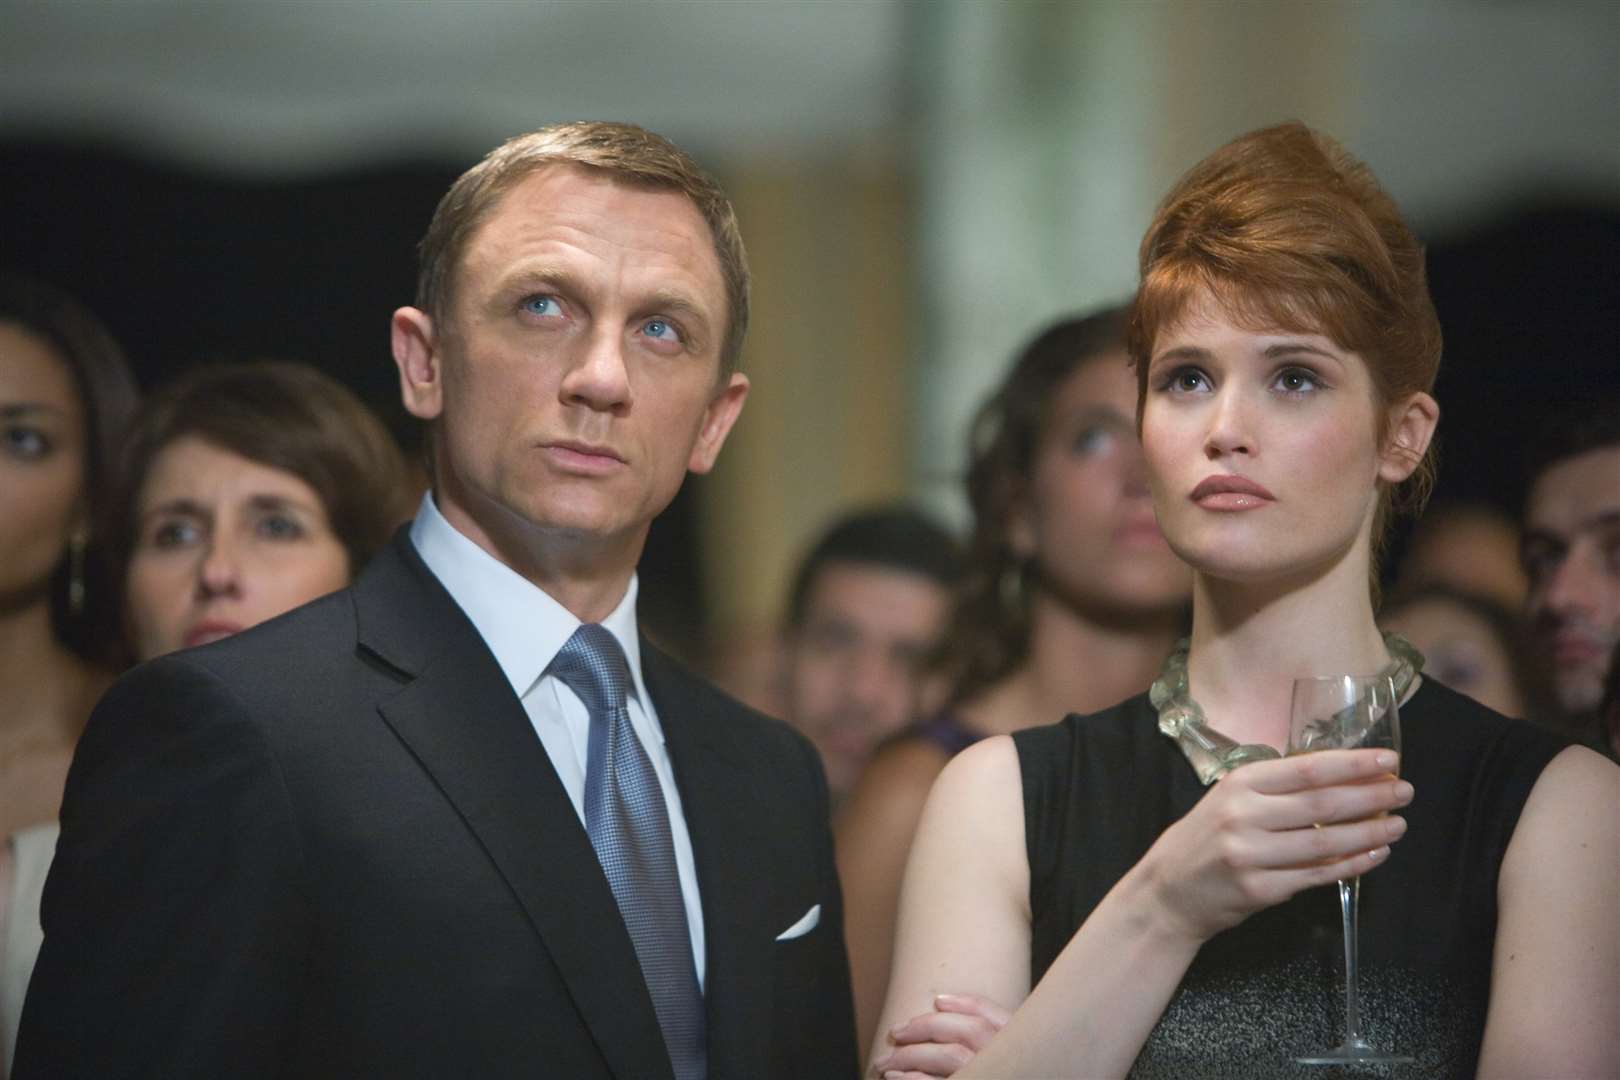 One of Gemma's breakthrough roles saw her star opposite Daniel Craig in his second Bond outing